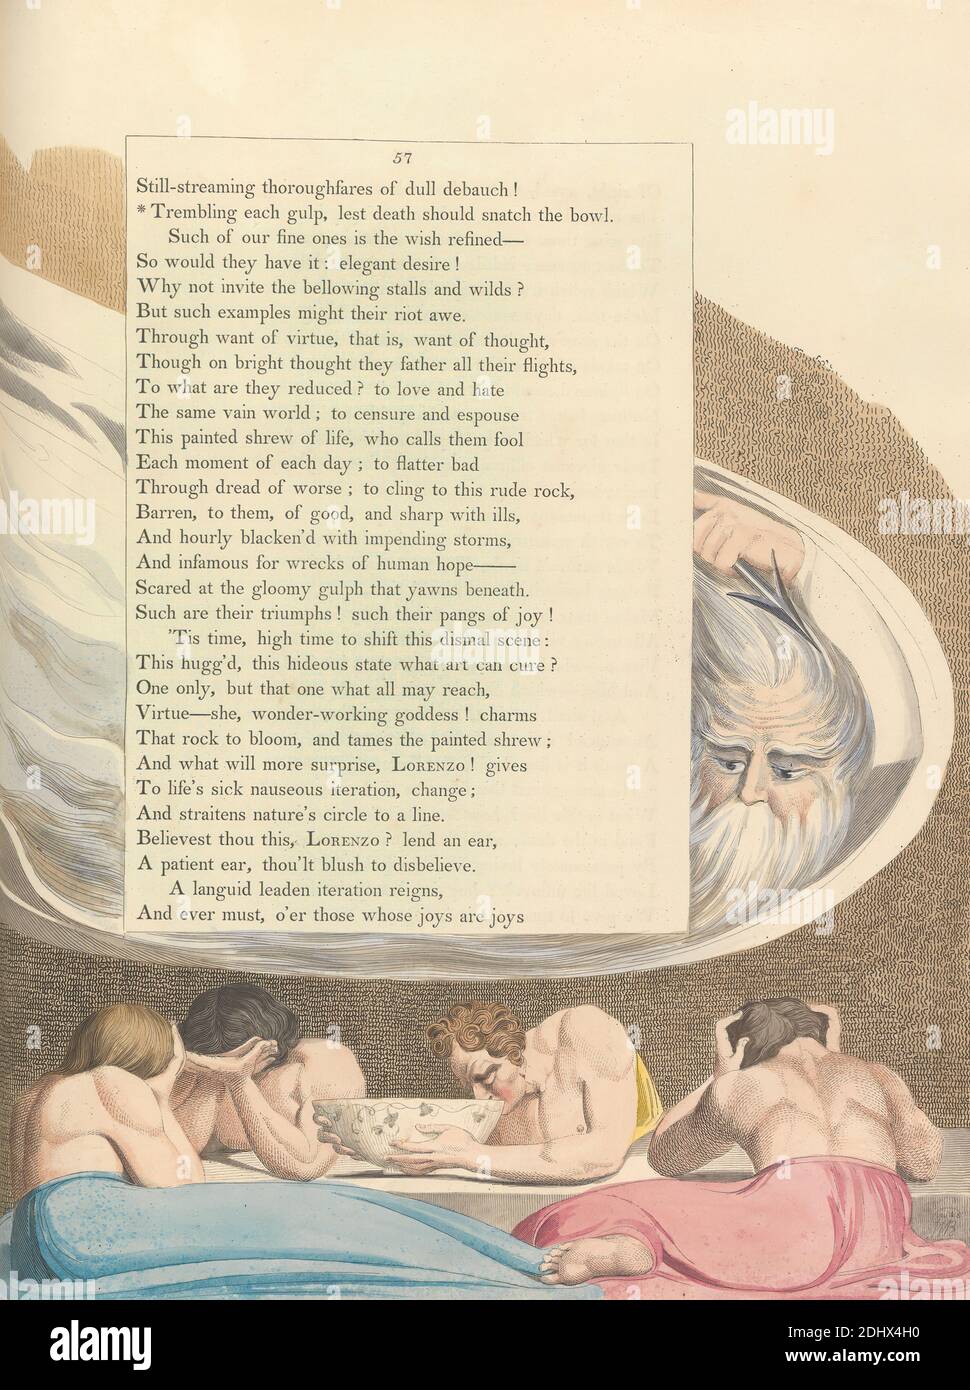 Young's Night Thoughts, Page 57, 'Trembling each gulp, lest death should snatch the bowl', Print made by William Blake, 1757–1827, British, ca. 1797, Etching and line engraving with watercolor on moderately thick, slightly textured, cream wove paper, Spine: 16 3/4 inches (42.5 cm), Sheet: 16 1/2 x 12 5/8 inches (41.9 x 32.1 cm), and Plate: 16 x 12 1/2 inches (40.6 x 31.8 cm), bowl, drinking, food, literary theme, men, mourning, table, text, women Stock Photo